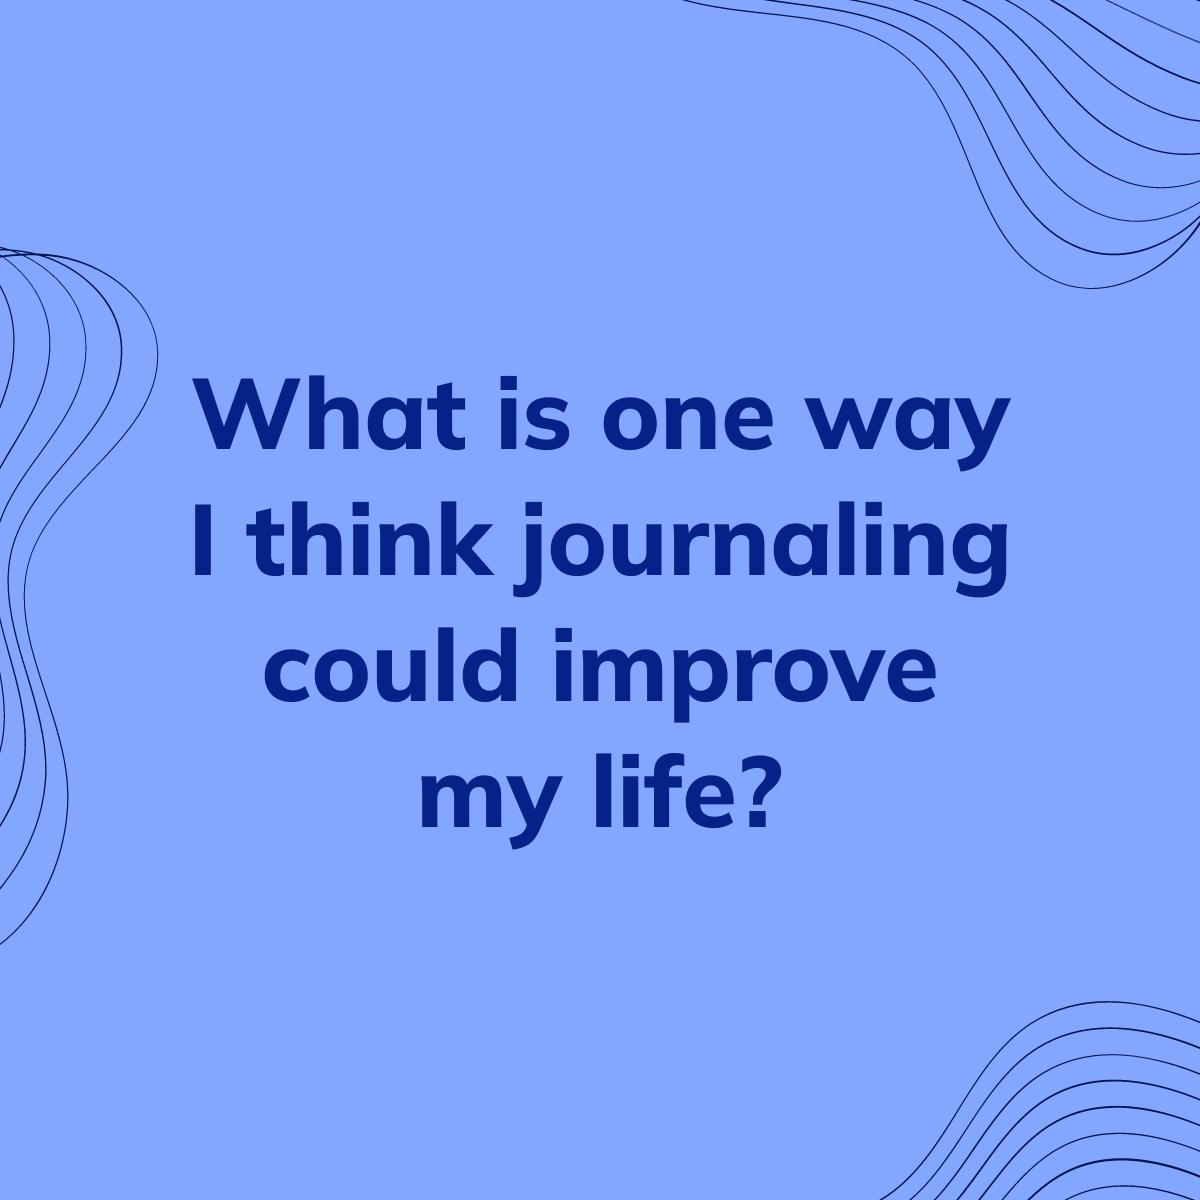 Journal Prompt: What is one way I think journaling could improve my life?